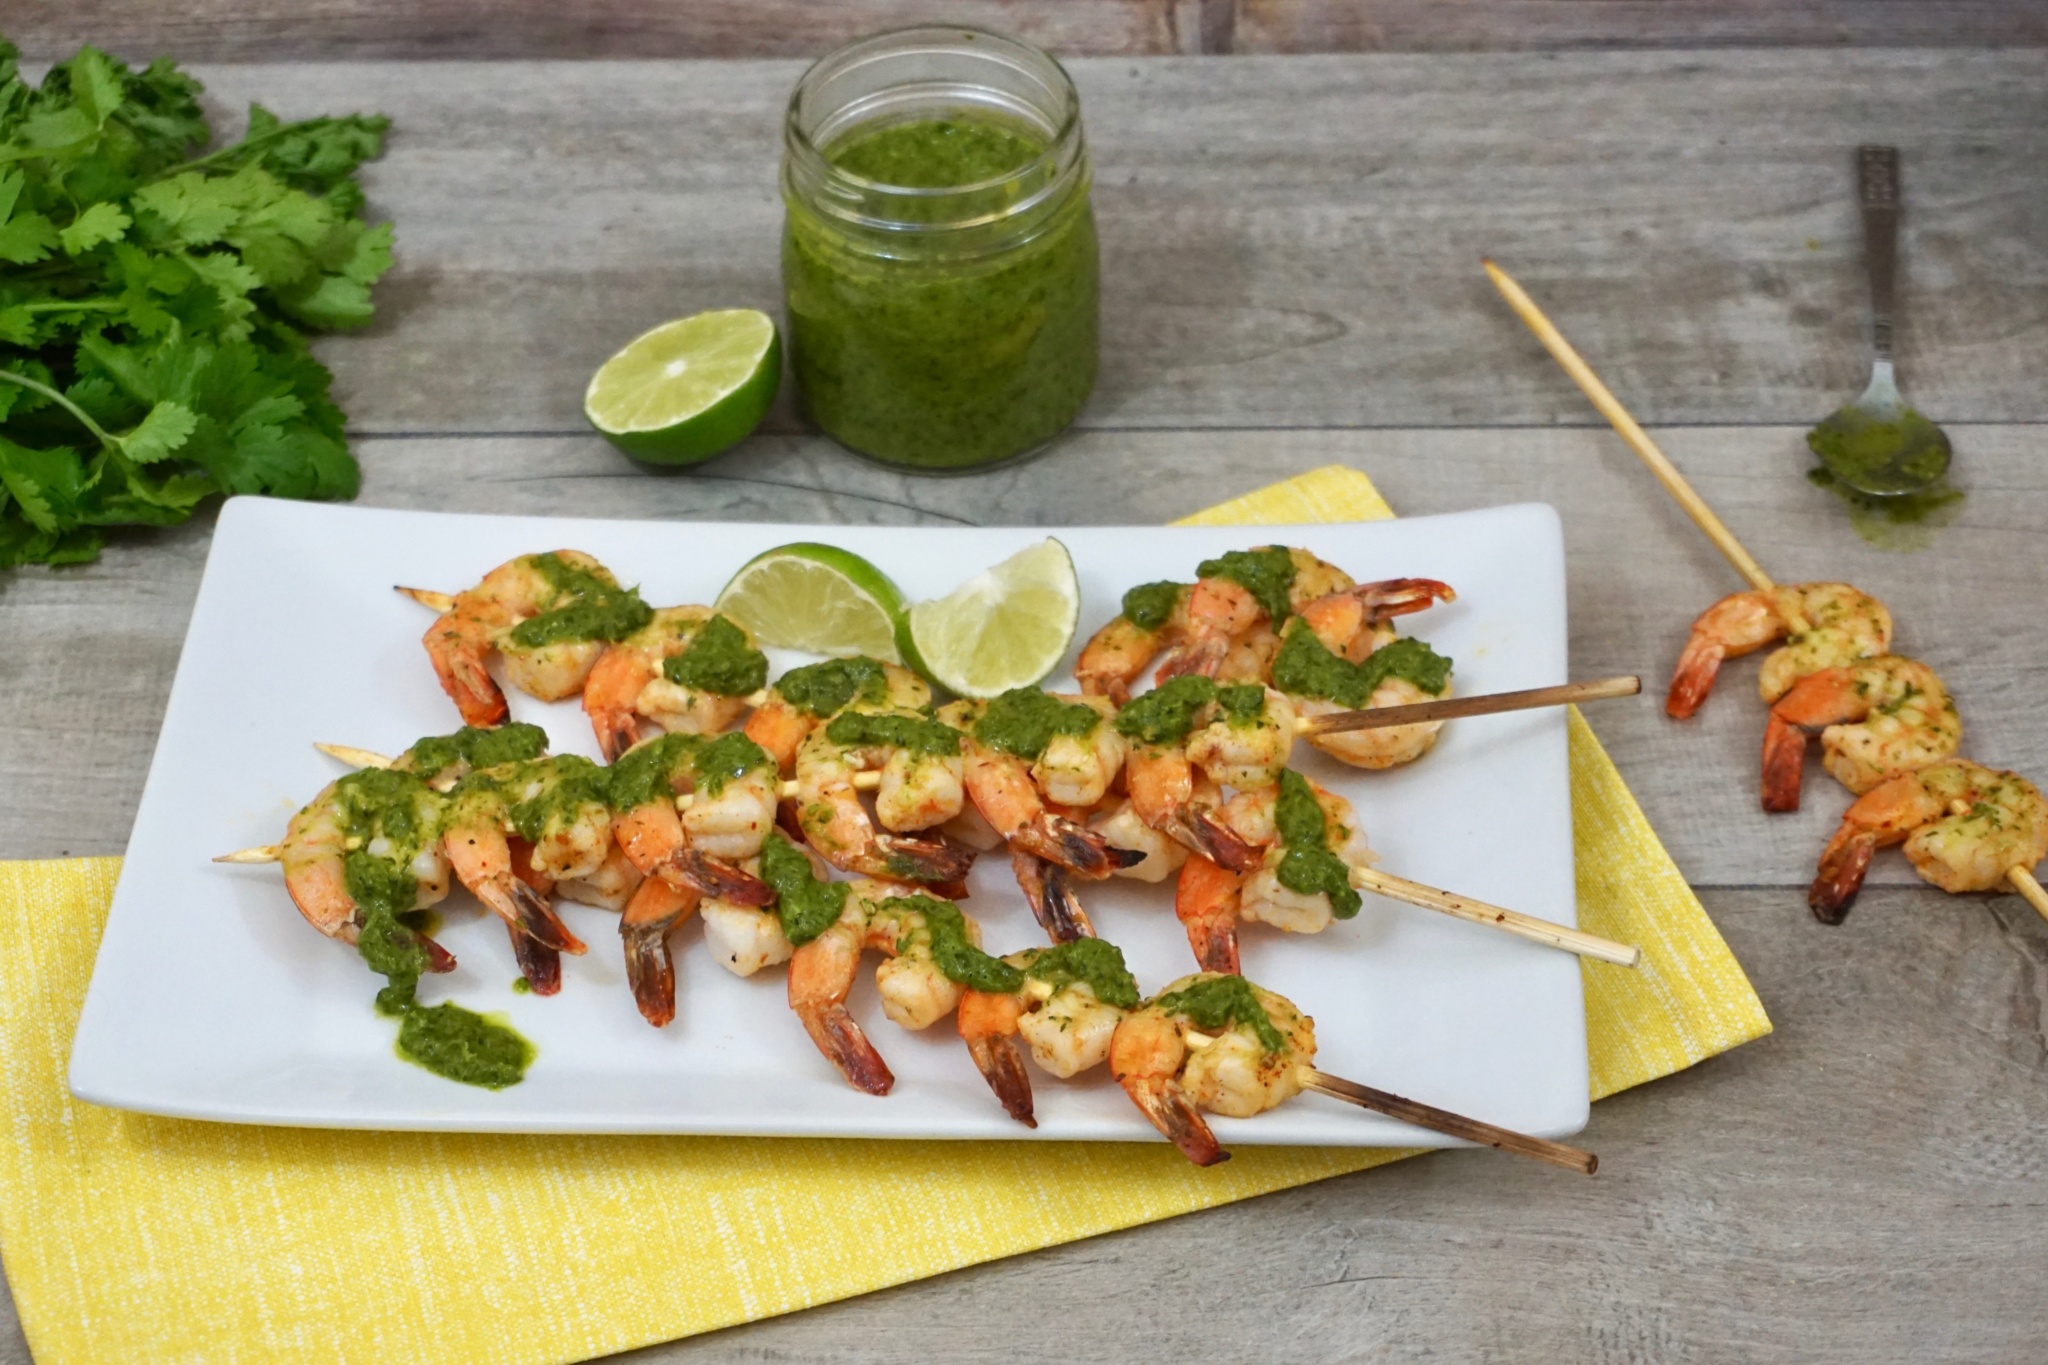 Chipotle Grilled Shrimp Skewers with Chimichurri